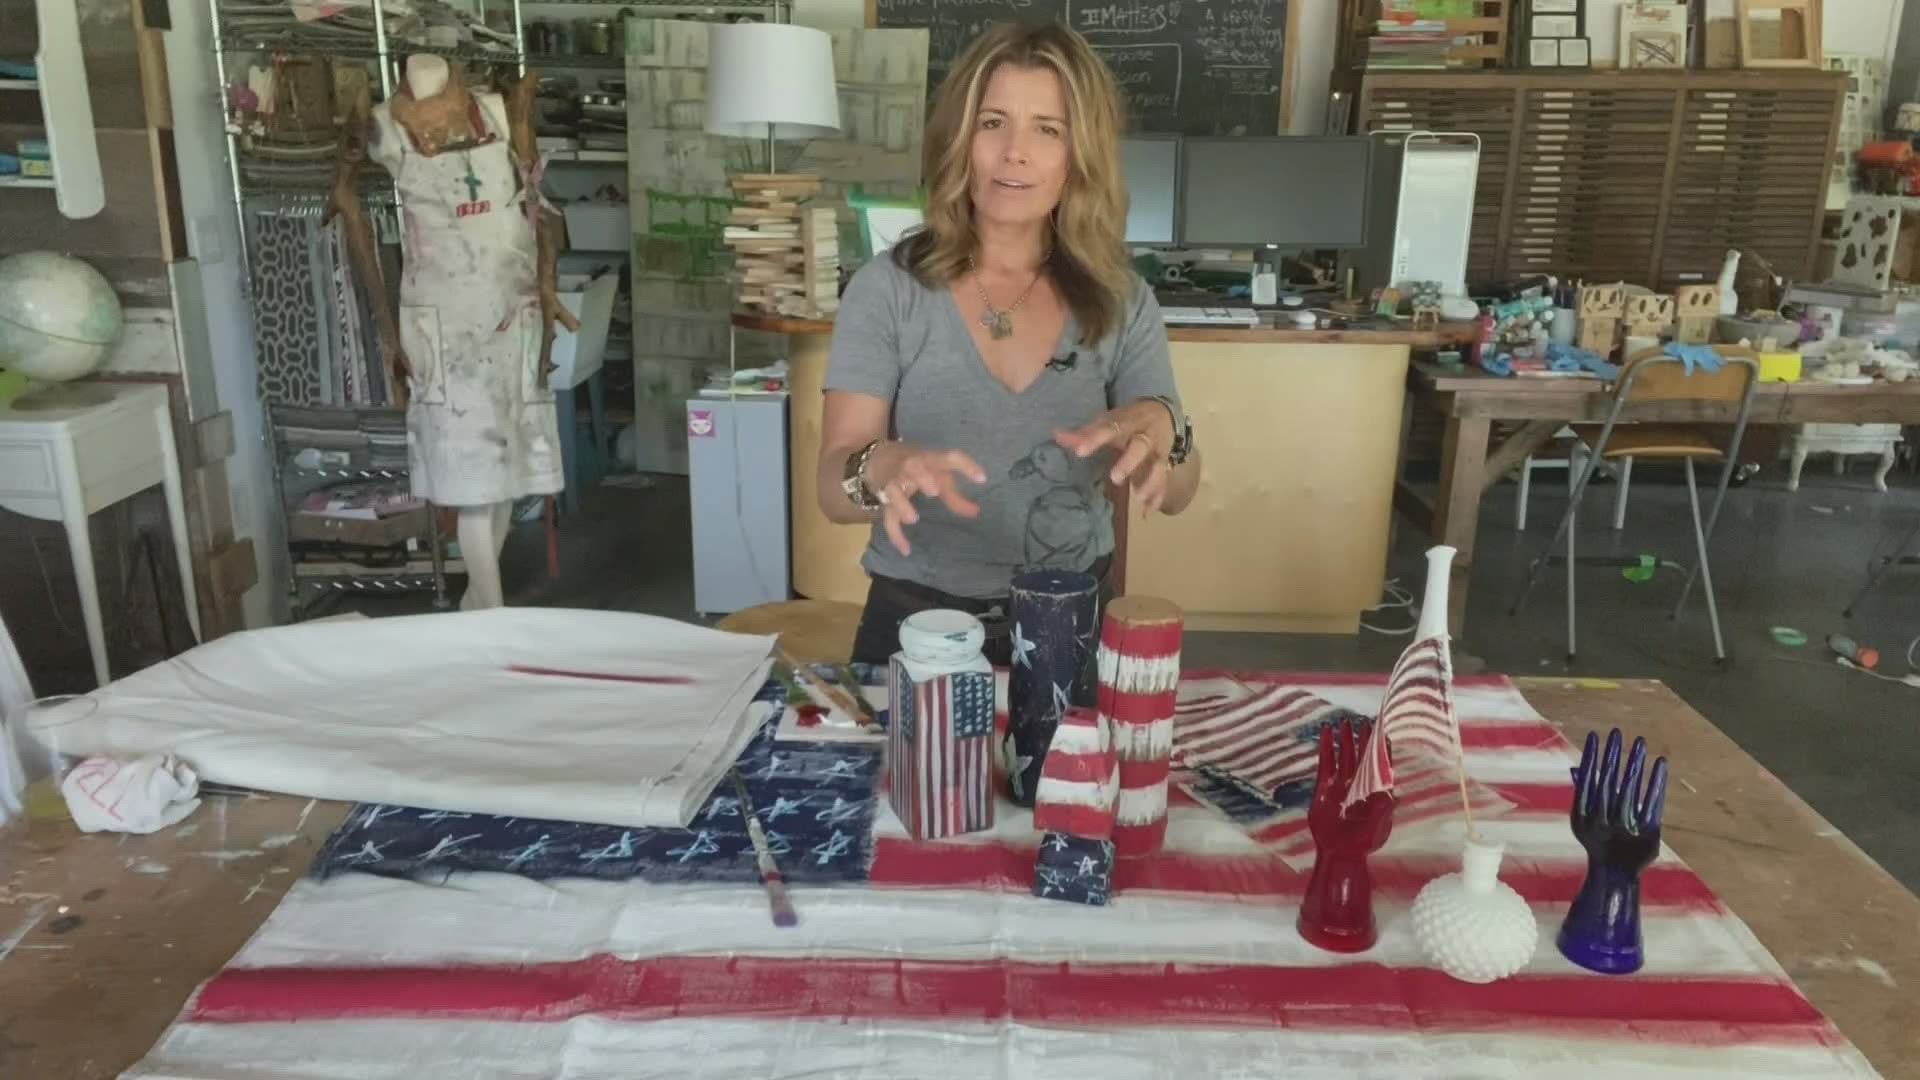 'Iowa Live' co-host Michele Brown shares some festive, patriotic projects ahead of the 4th of July!